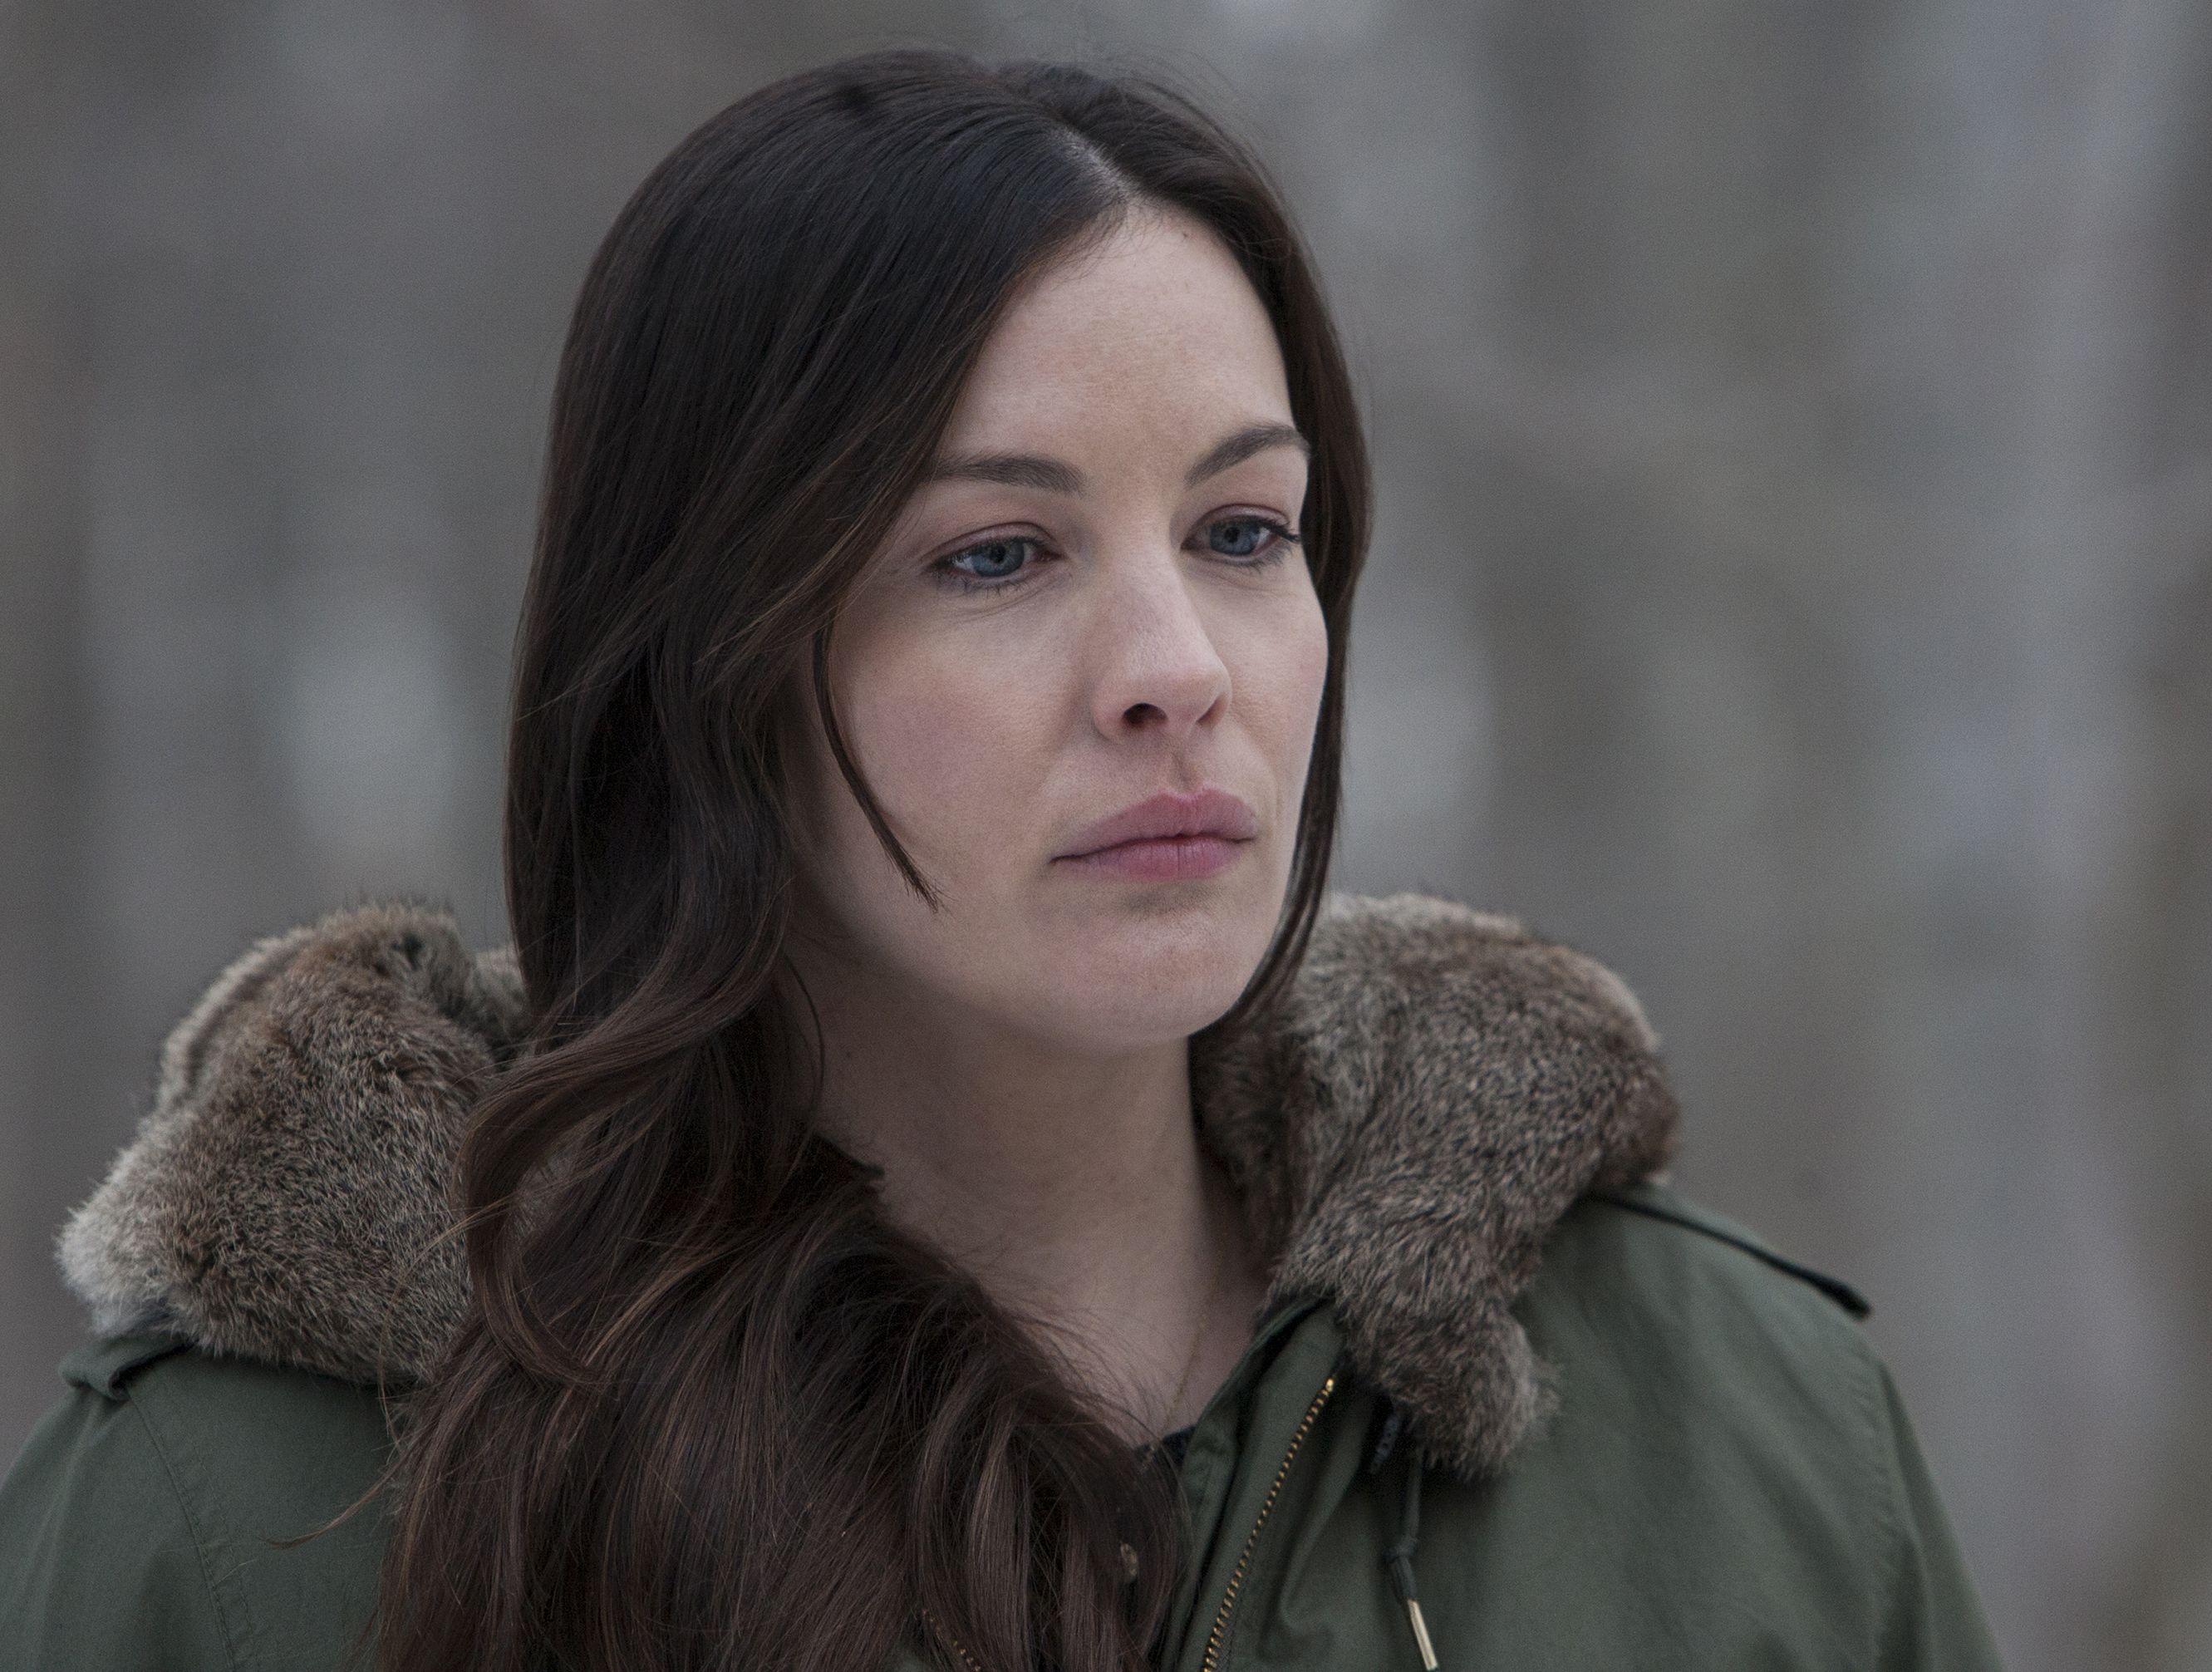 Liv Tyler joins the white people in The Leftovers